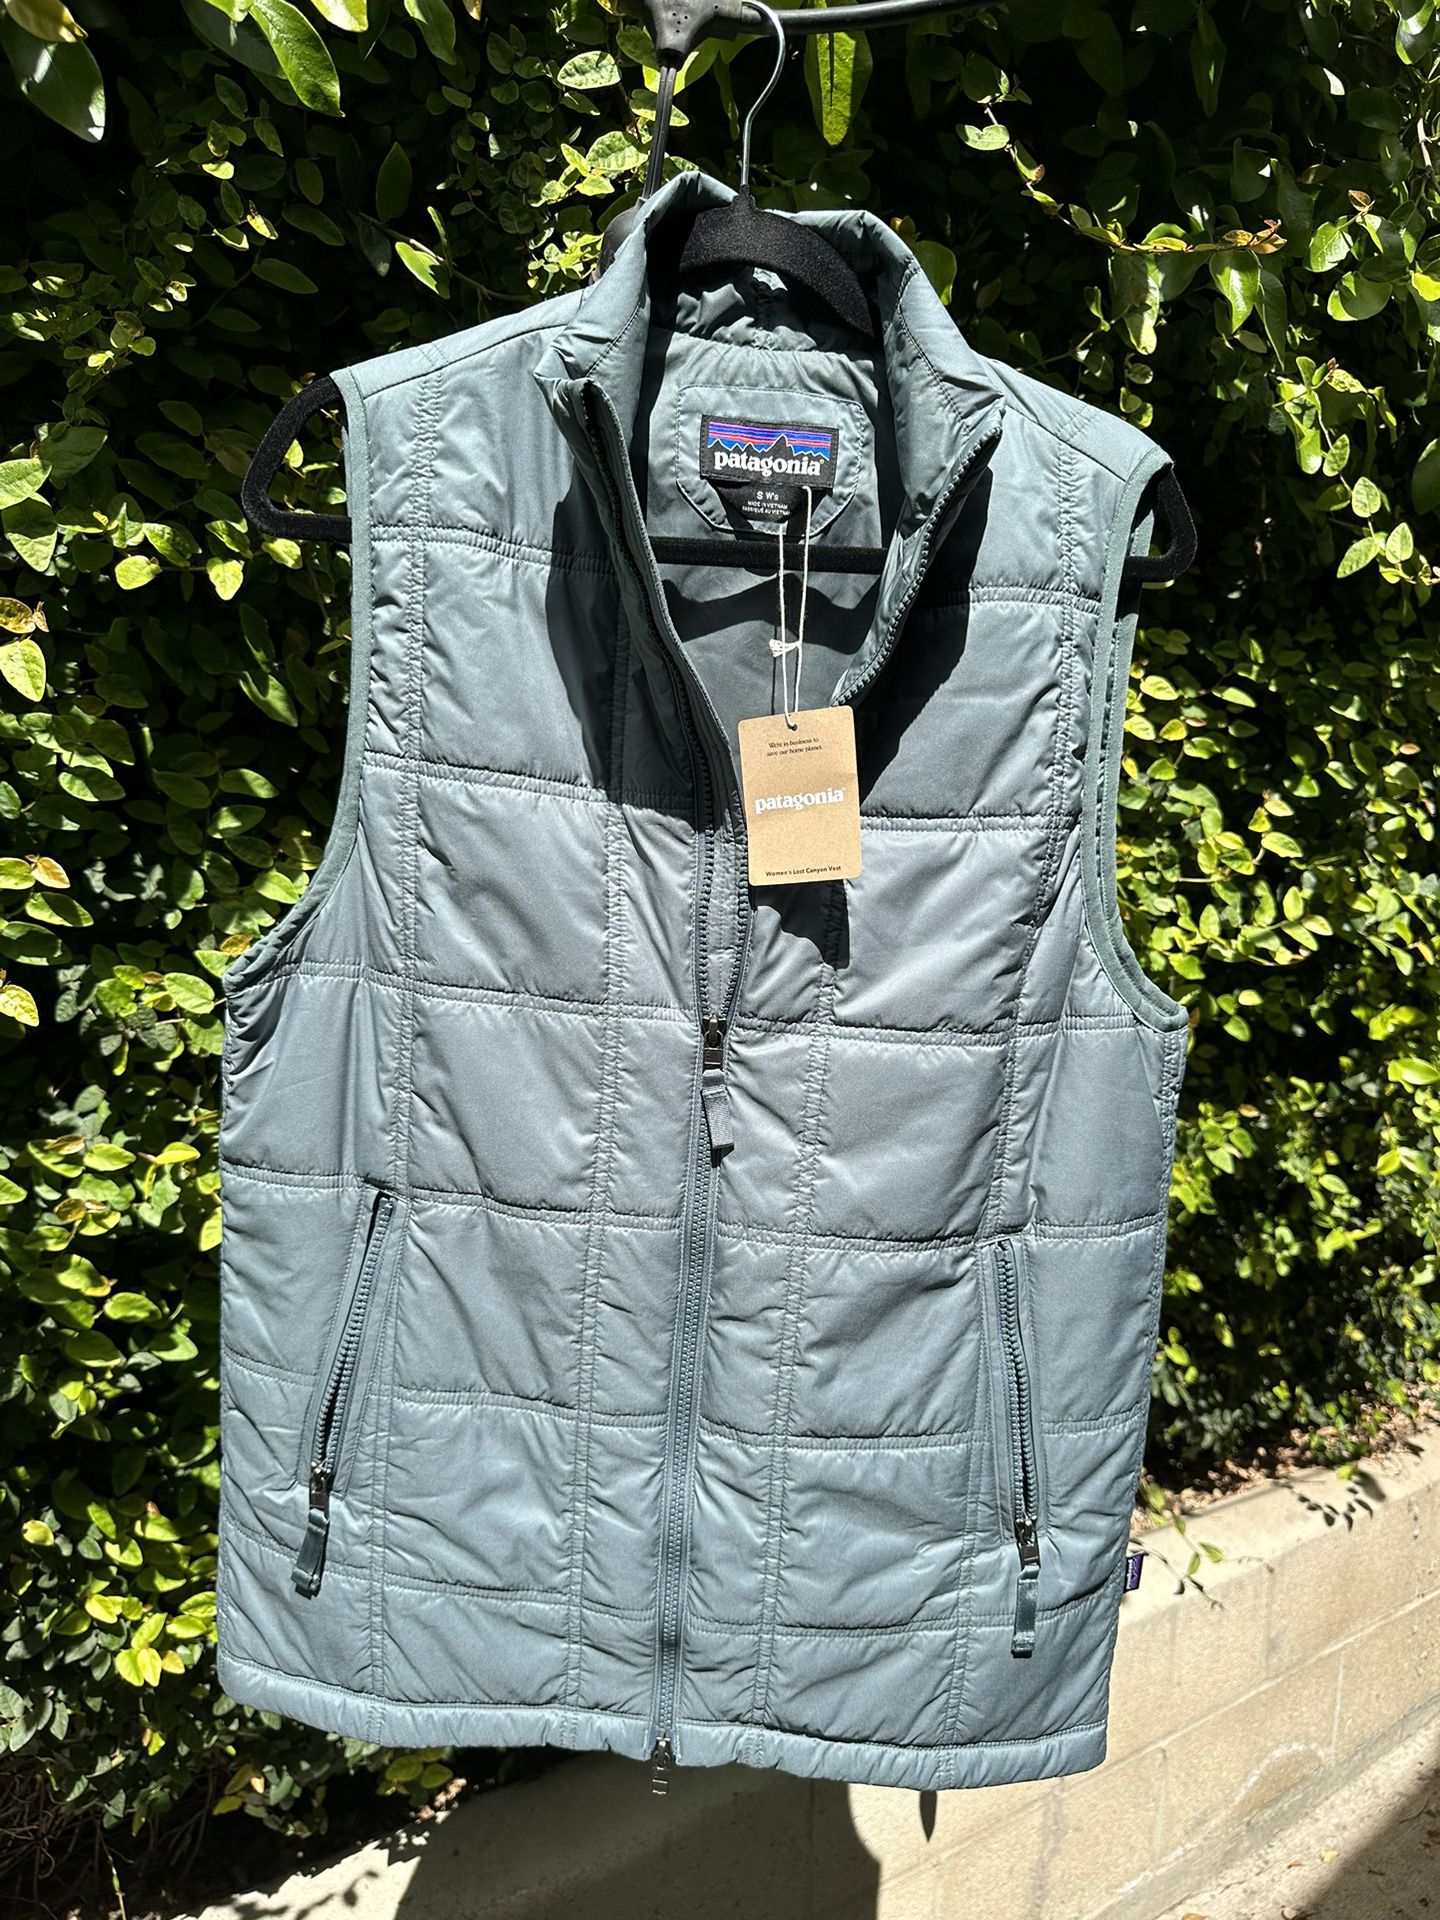 New: Patagonia Women’s Lost Canyon Vest Size S